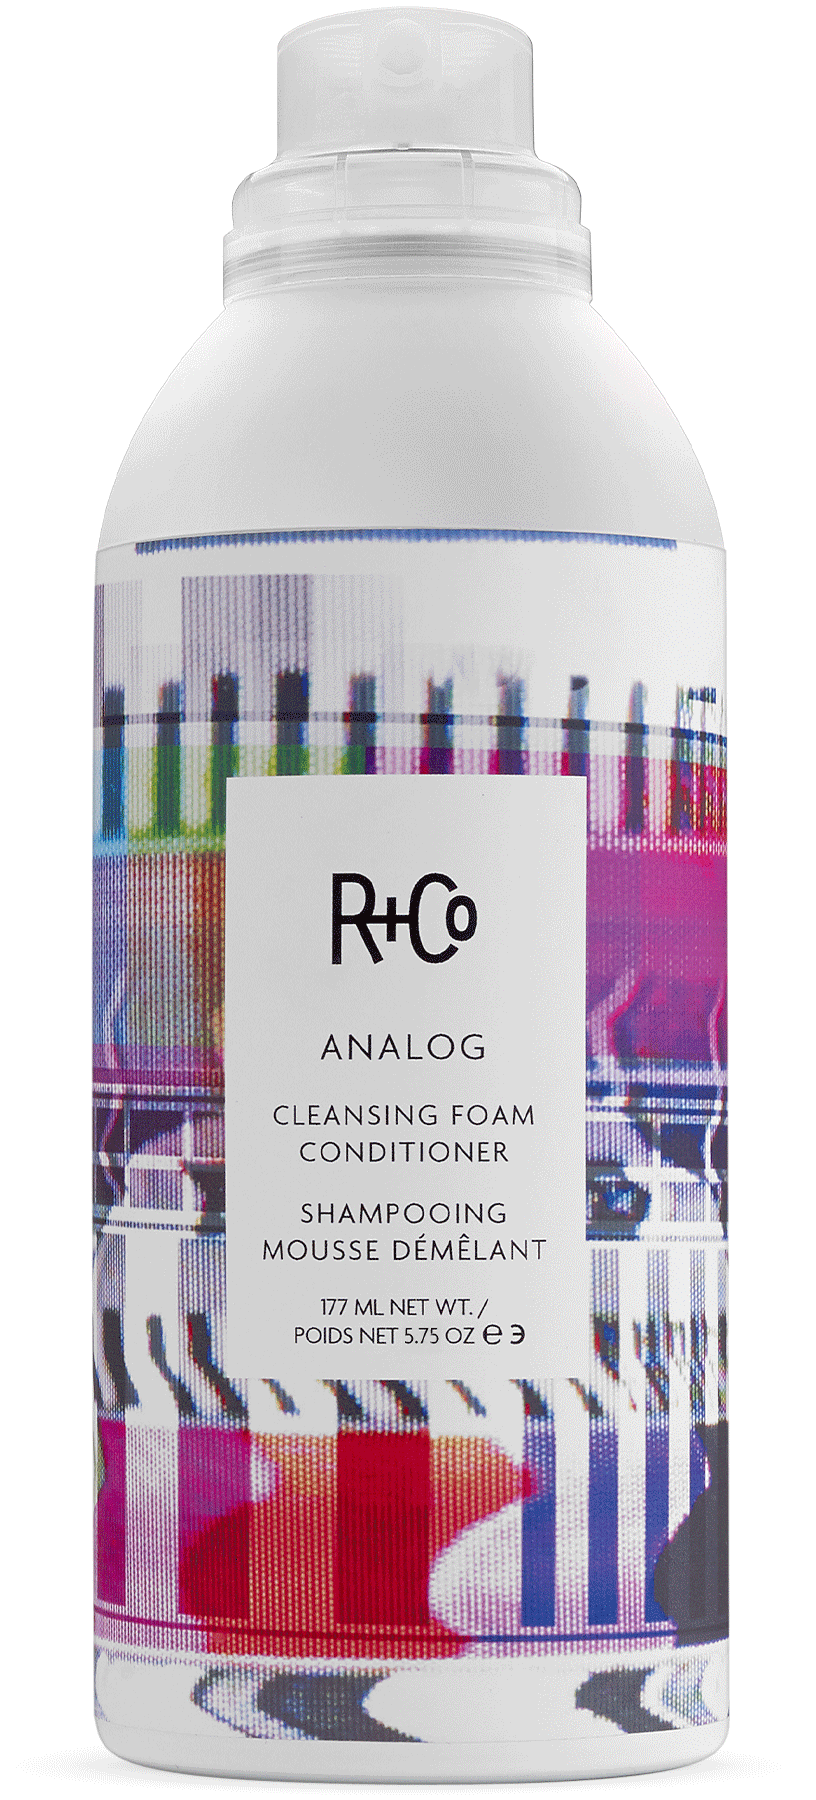 R+CO-Analog-Cleansing Foam Conditioner 177ml